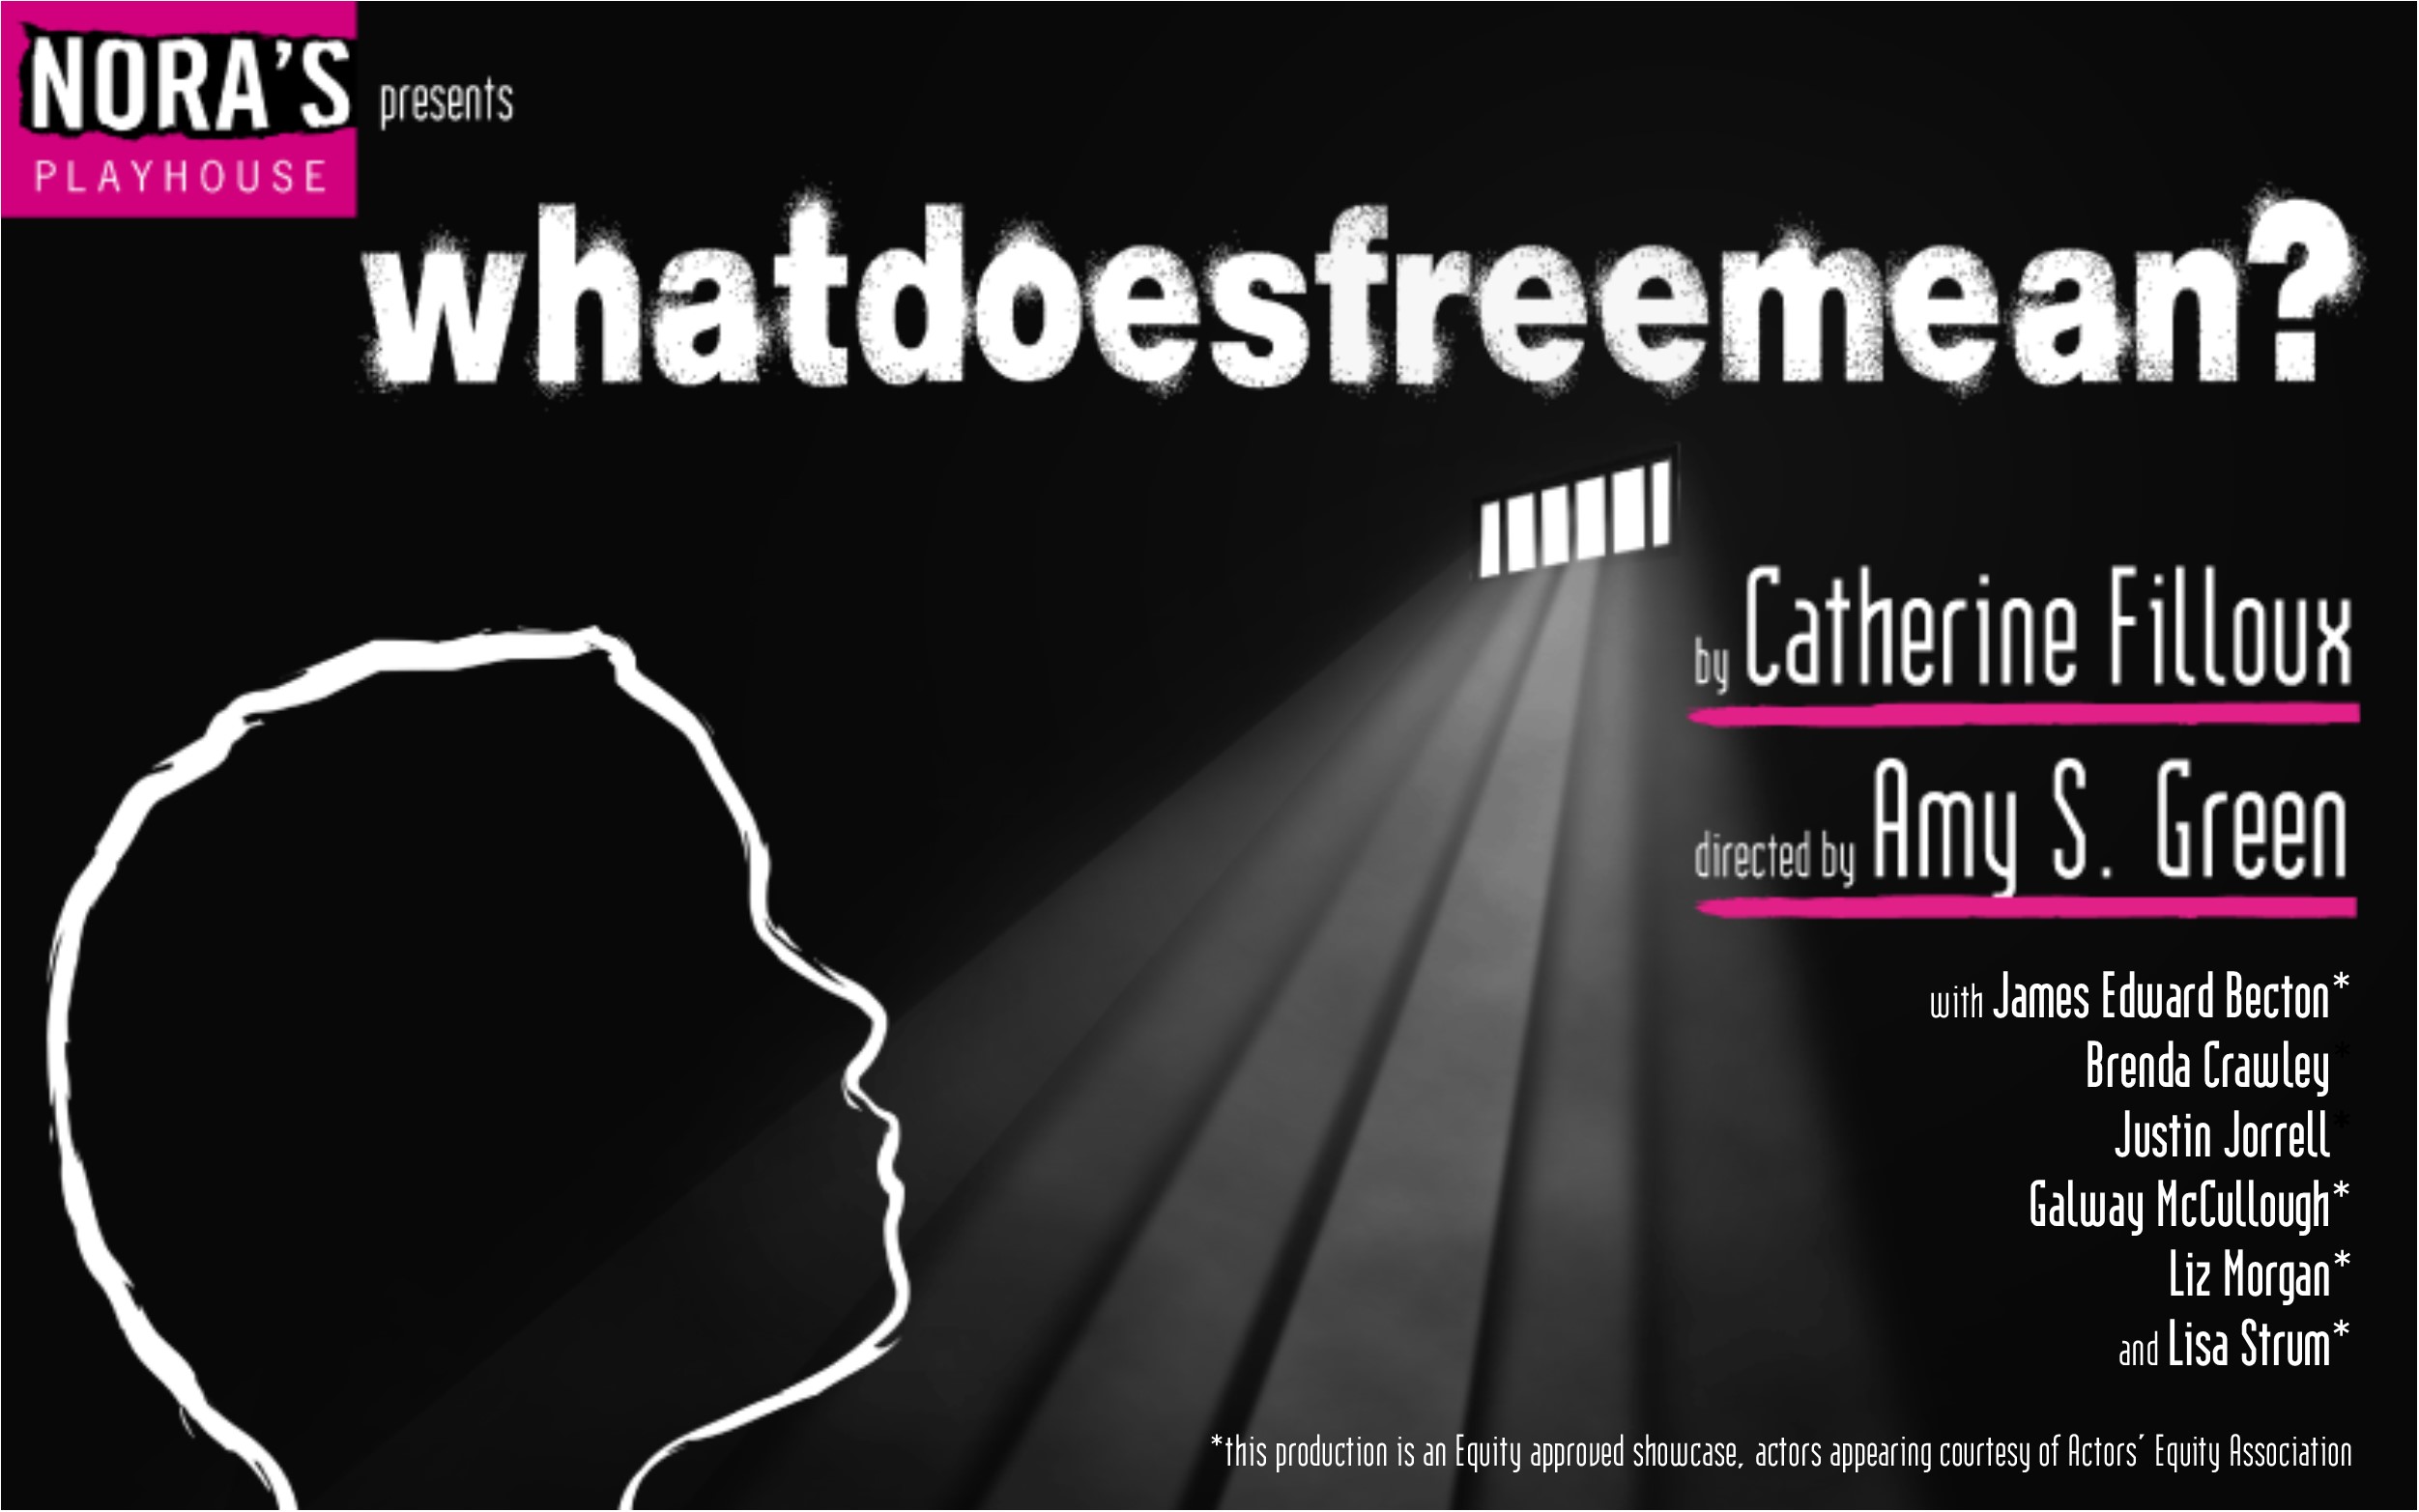 whatdoesfreemean? by Catherin Filloux | at The Tank July 6-22